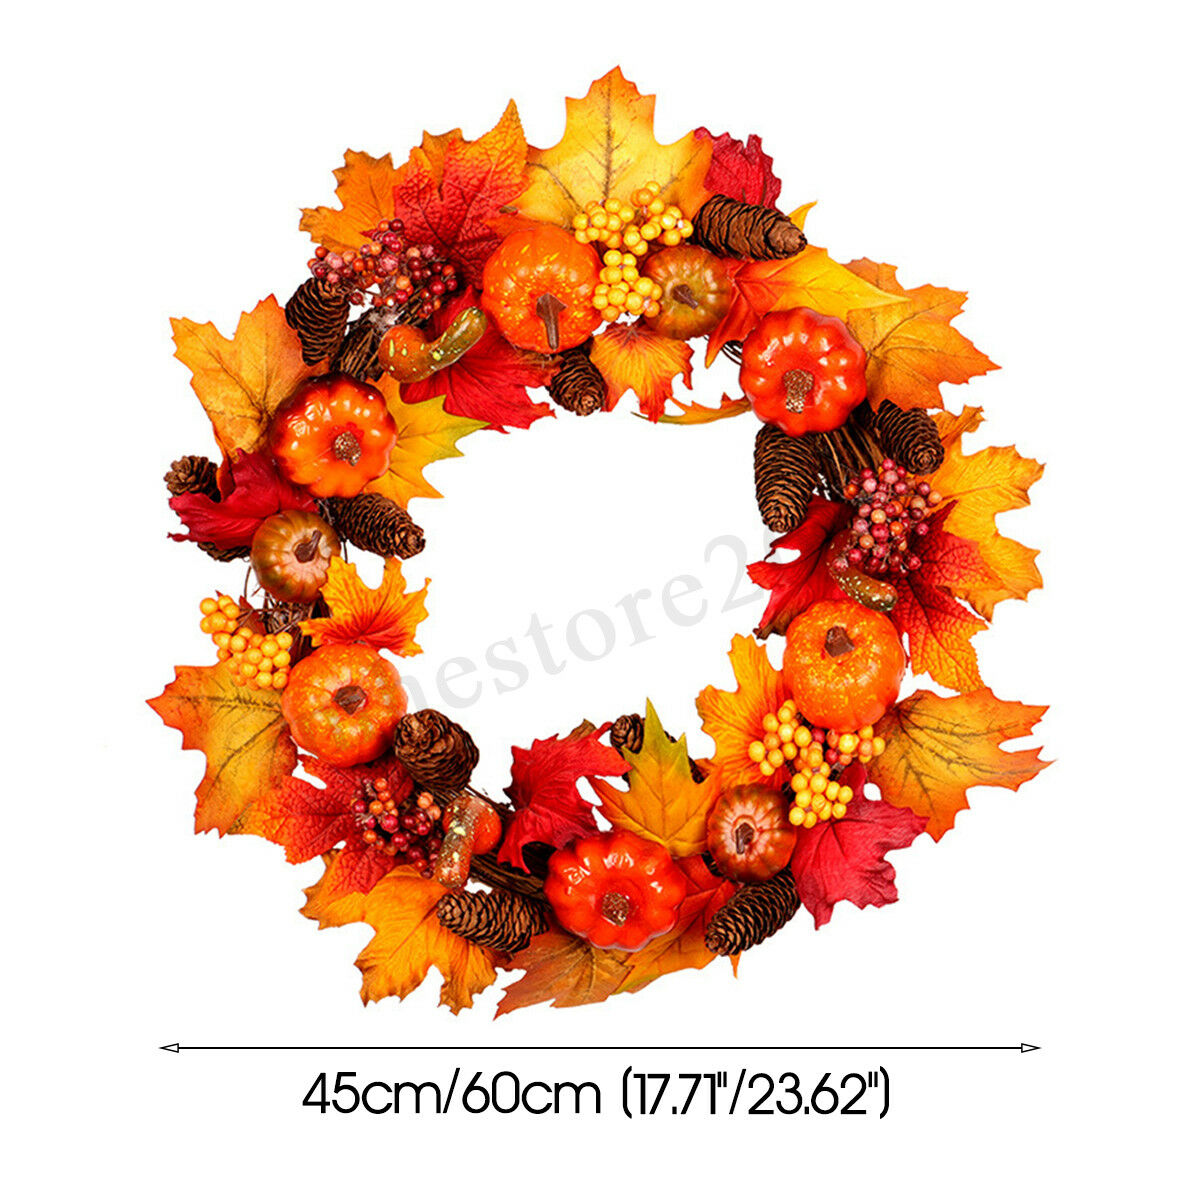 4560cm-Wreath-Garland-Maple-Leaves-Pumpkin-Door-For-Christmas-Party-Decorations-1637102-8